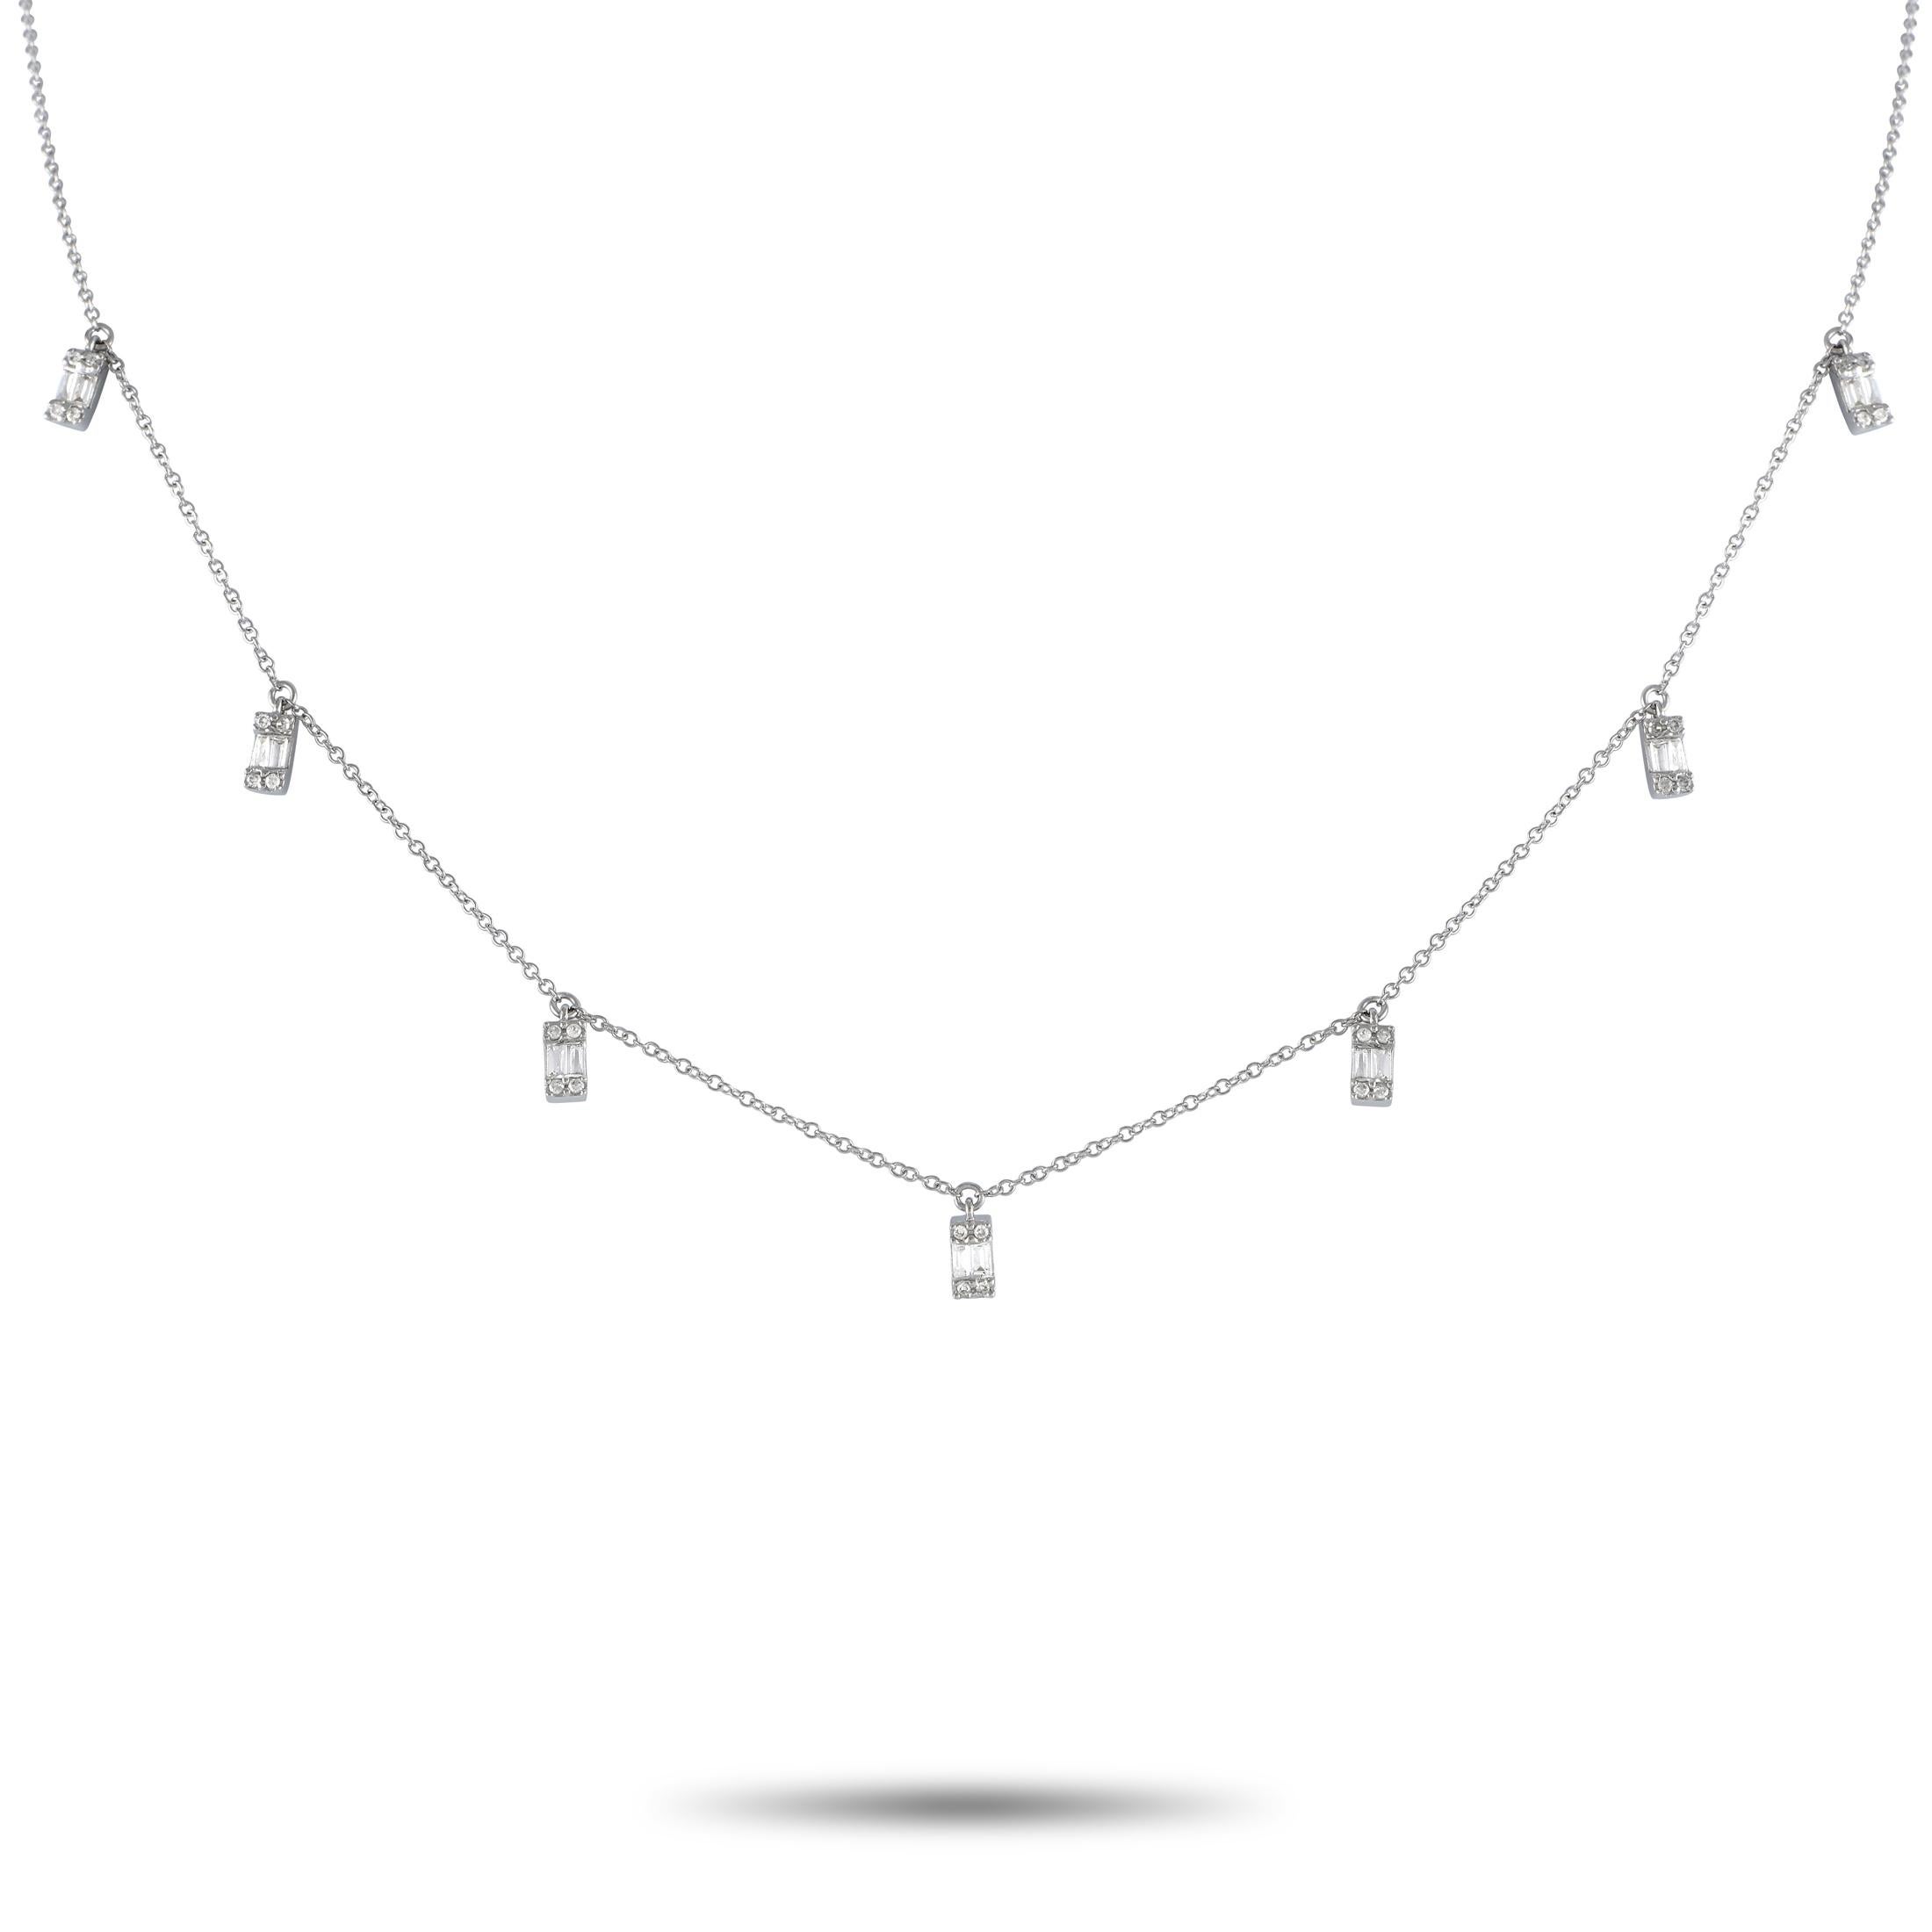 14K White Gold 0.33ct Diamond Station Necklace PN14837 In Excellent Condition For Sale In Southampton, PA